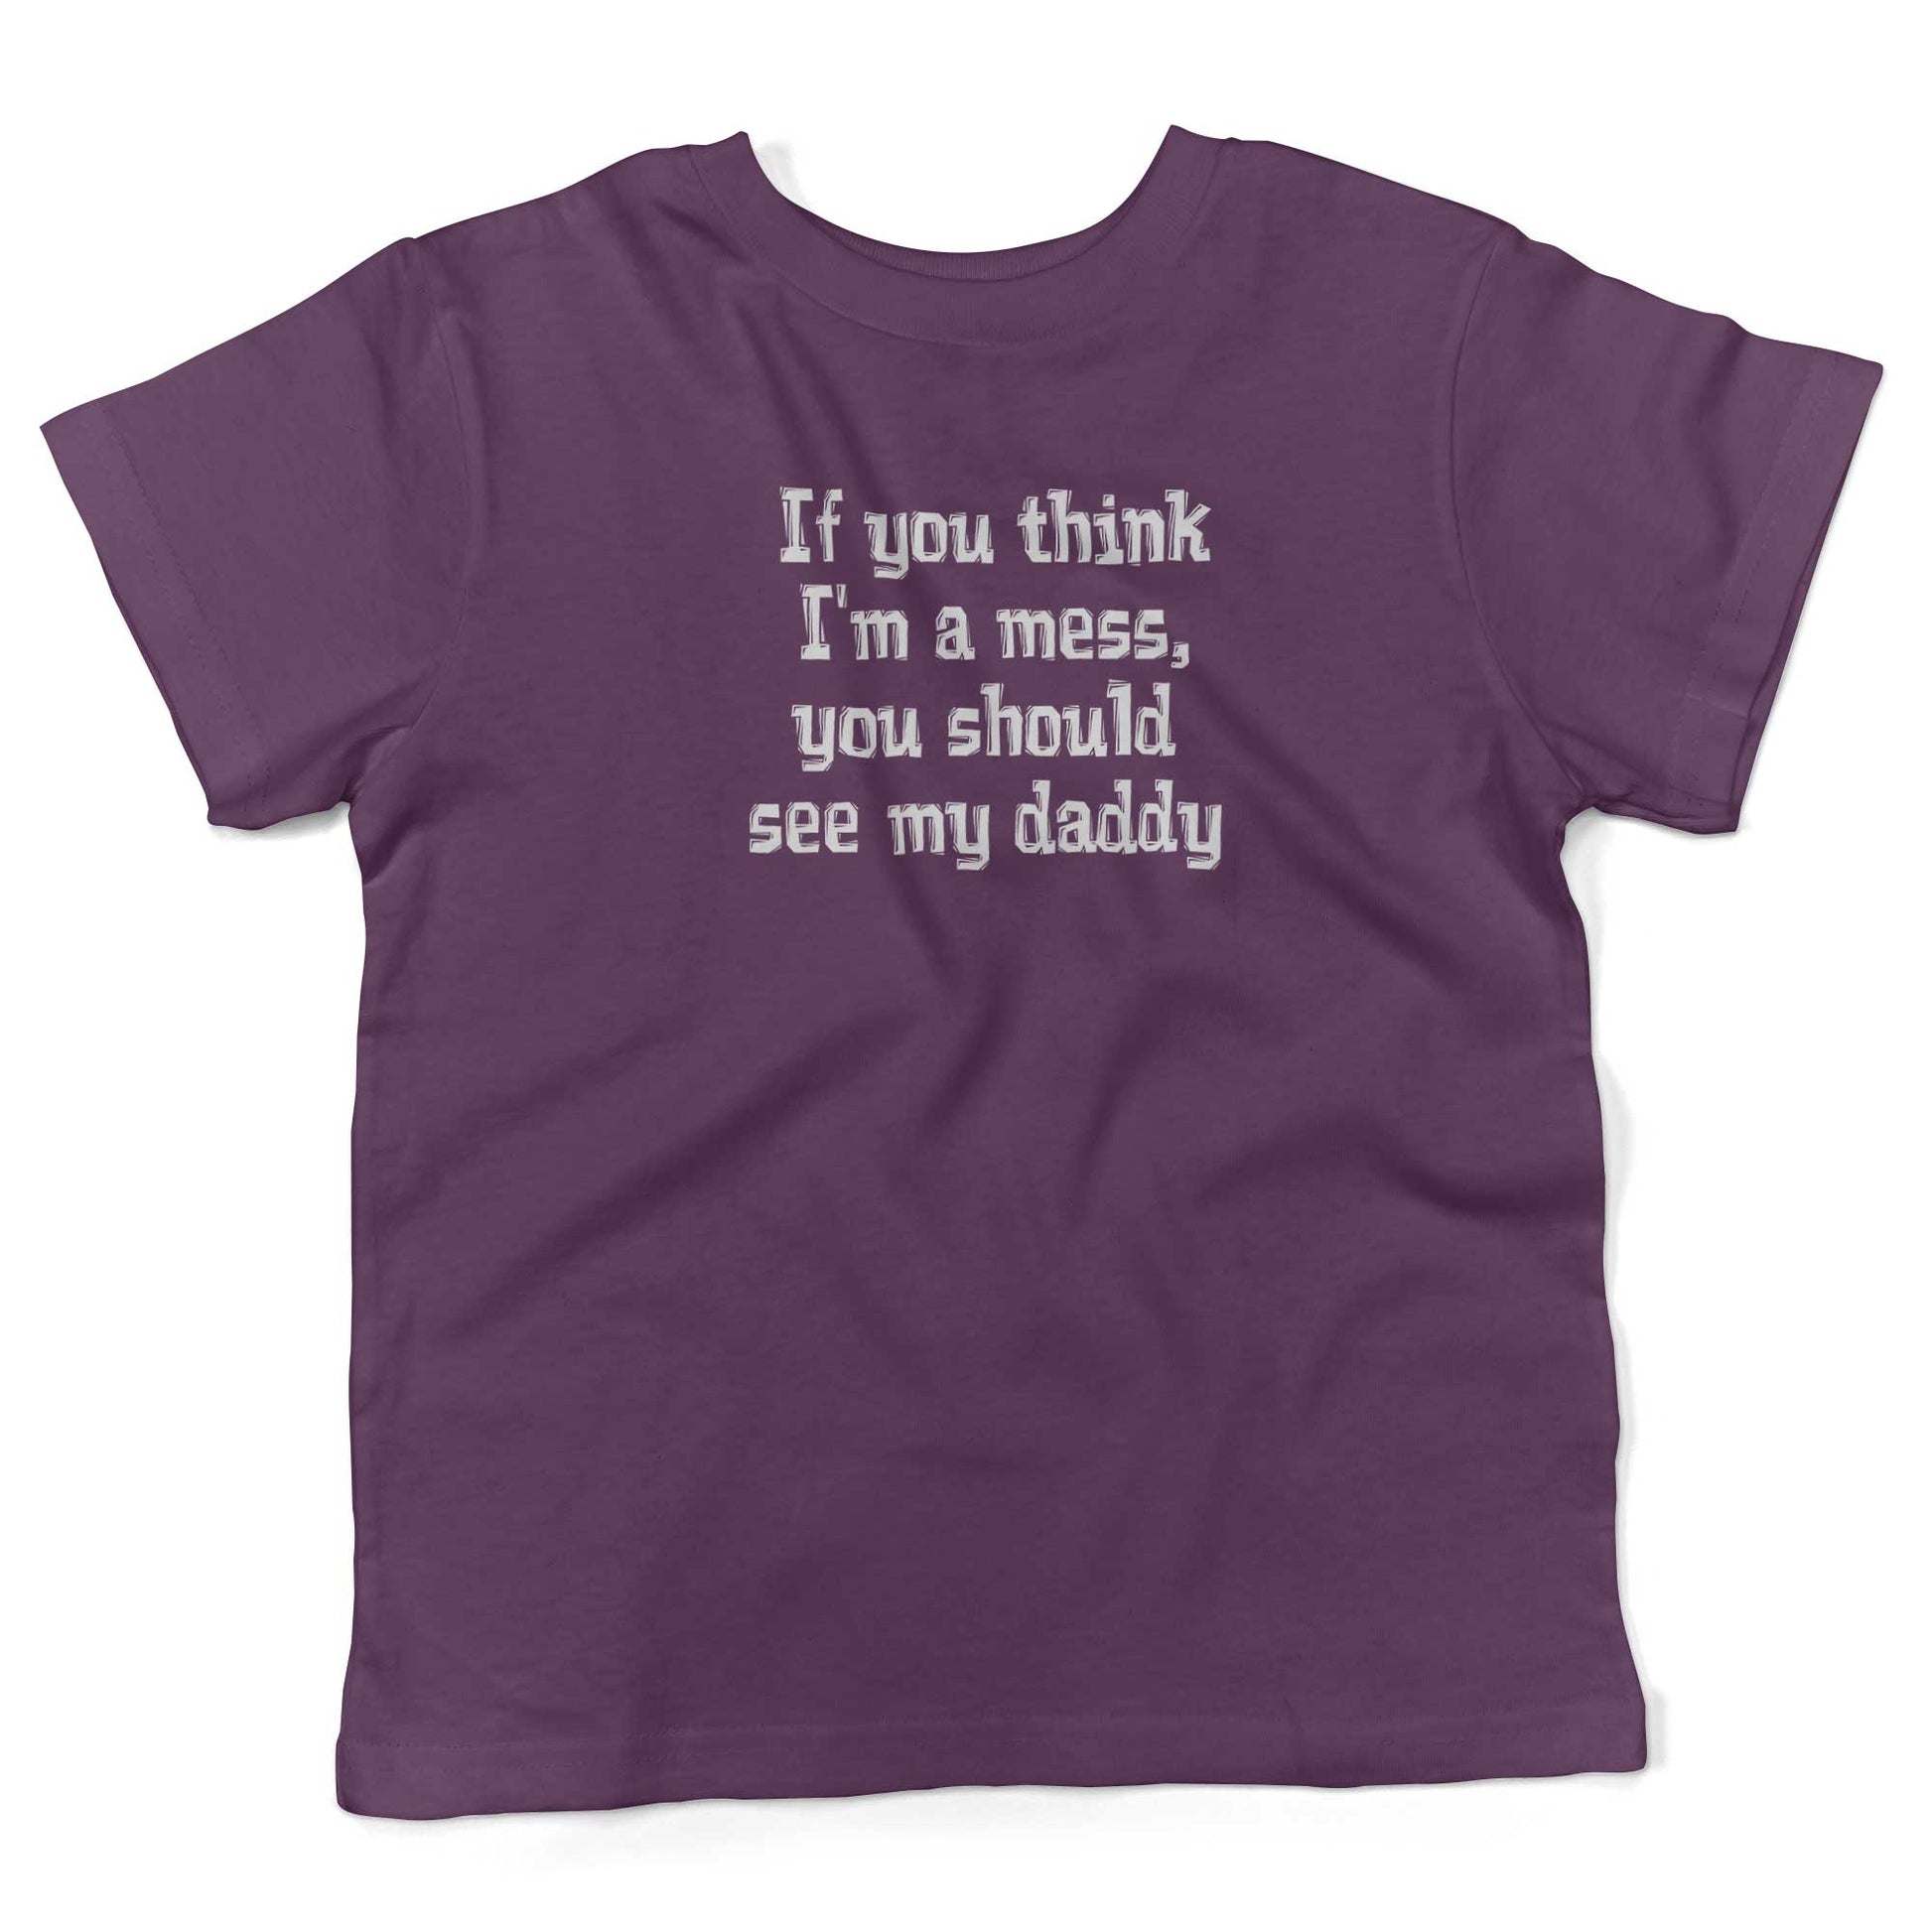 If You Think I'm A Mess, You Should See My Daddy Toddler Shirt-Organic Purple-2T